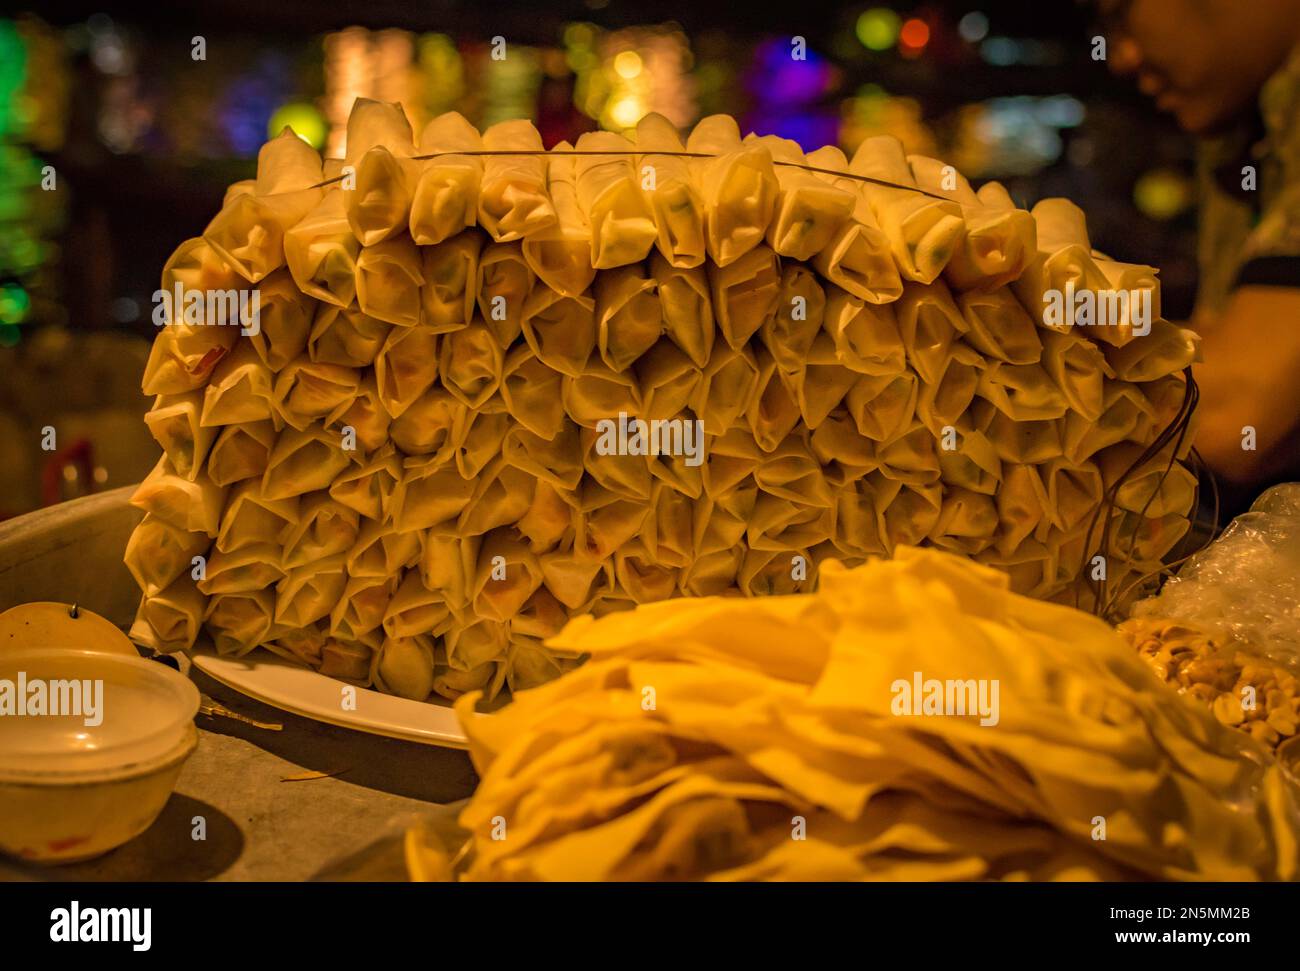 A pile display of spring rolls by night in Hoi An, Vietnam. Stock Photo